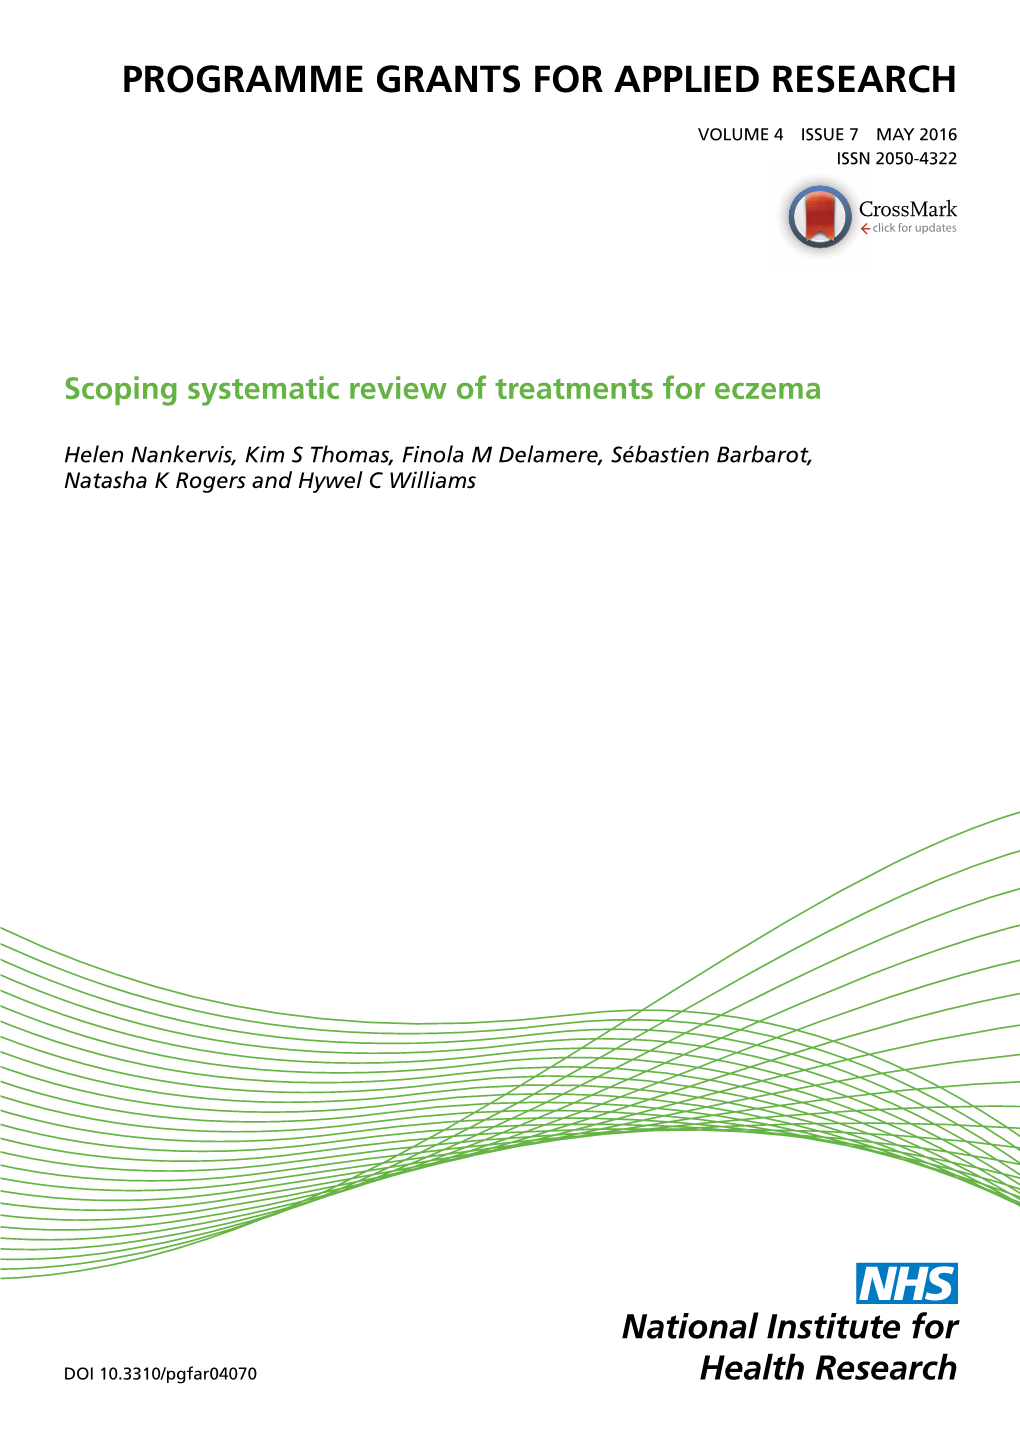 Scoping Systematic Review of Treatments for Eczema